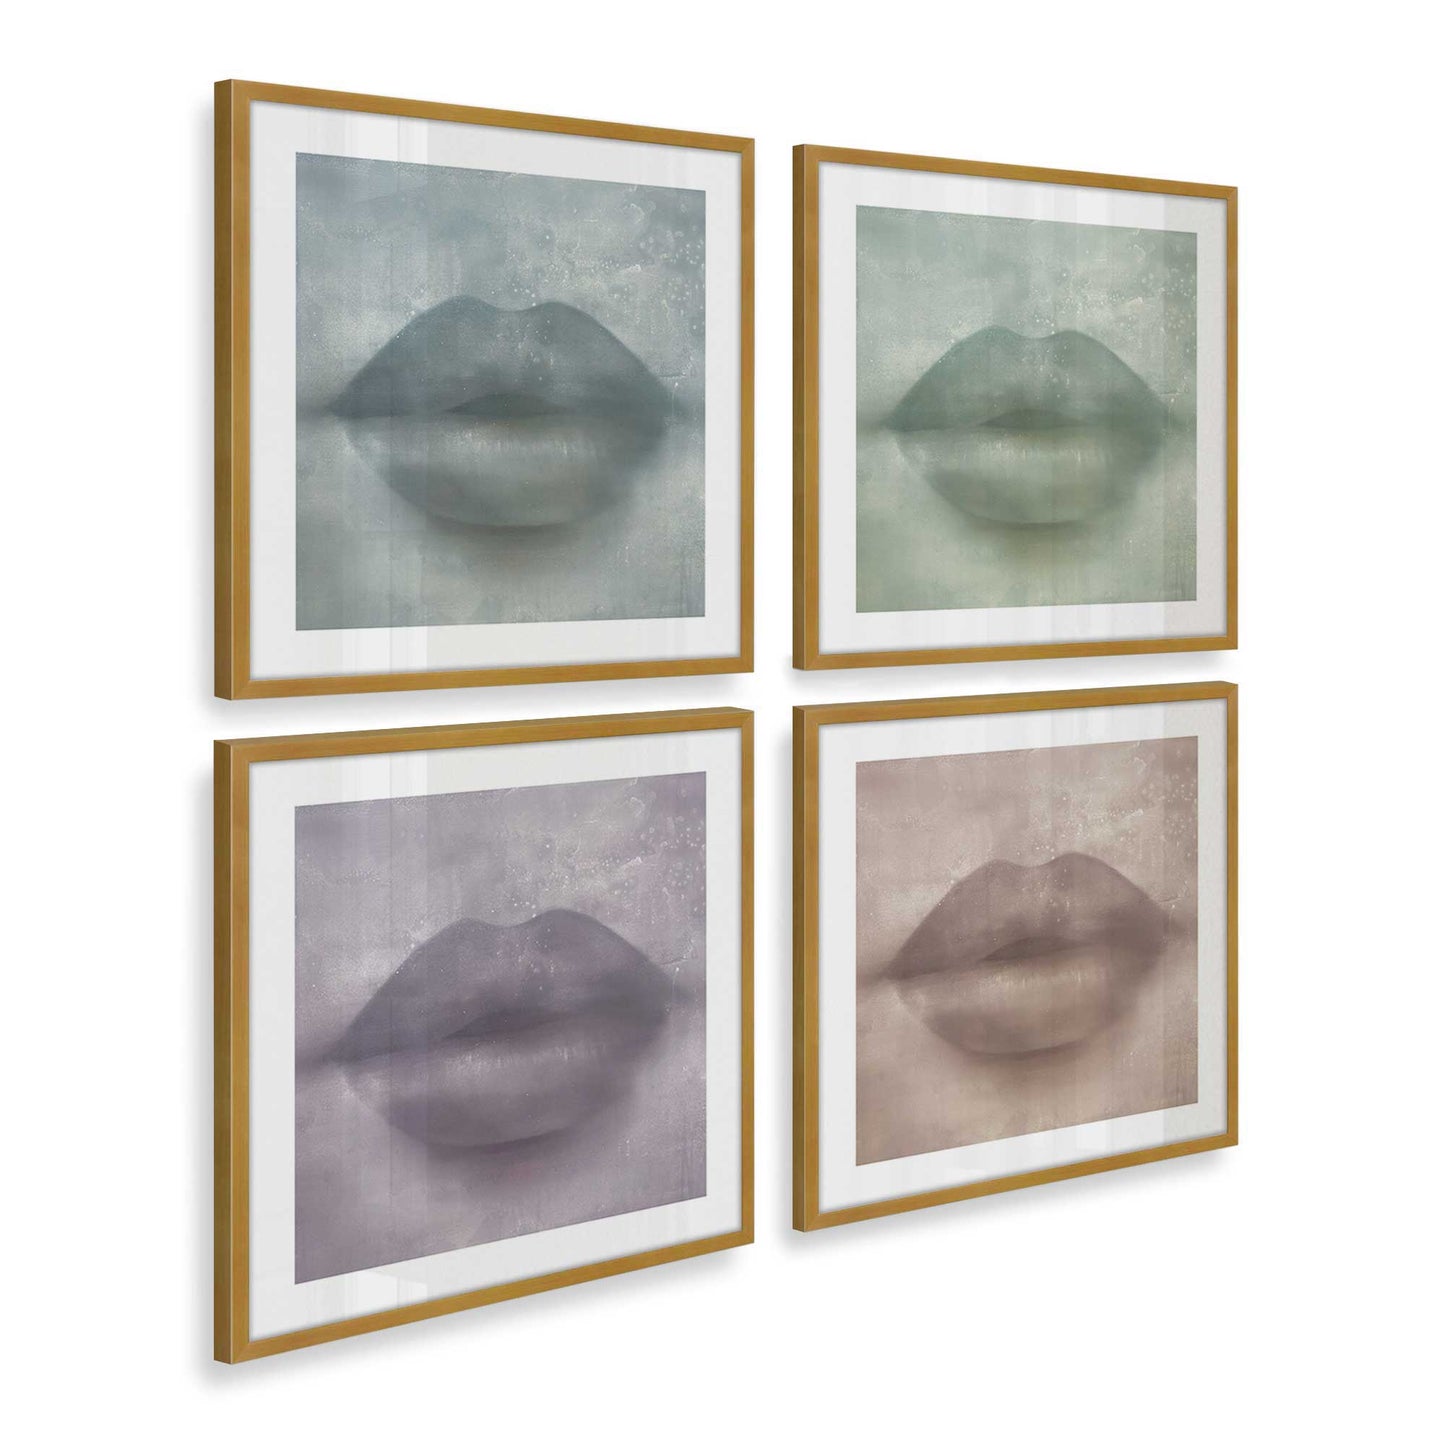 [Color:Polished Gold] Picture of art in a Polished Gold frame at an angle